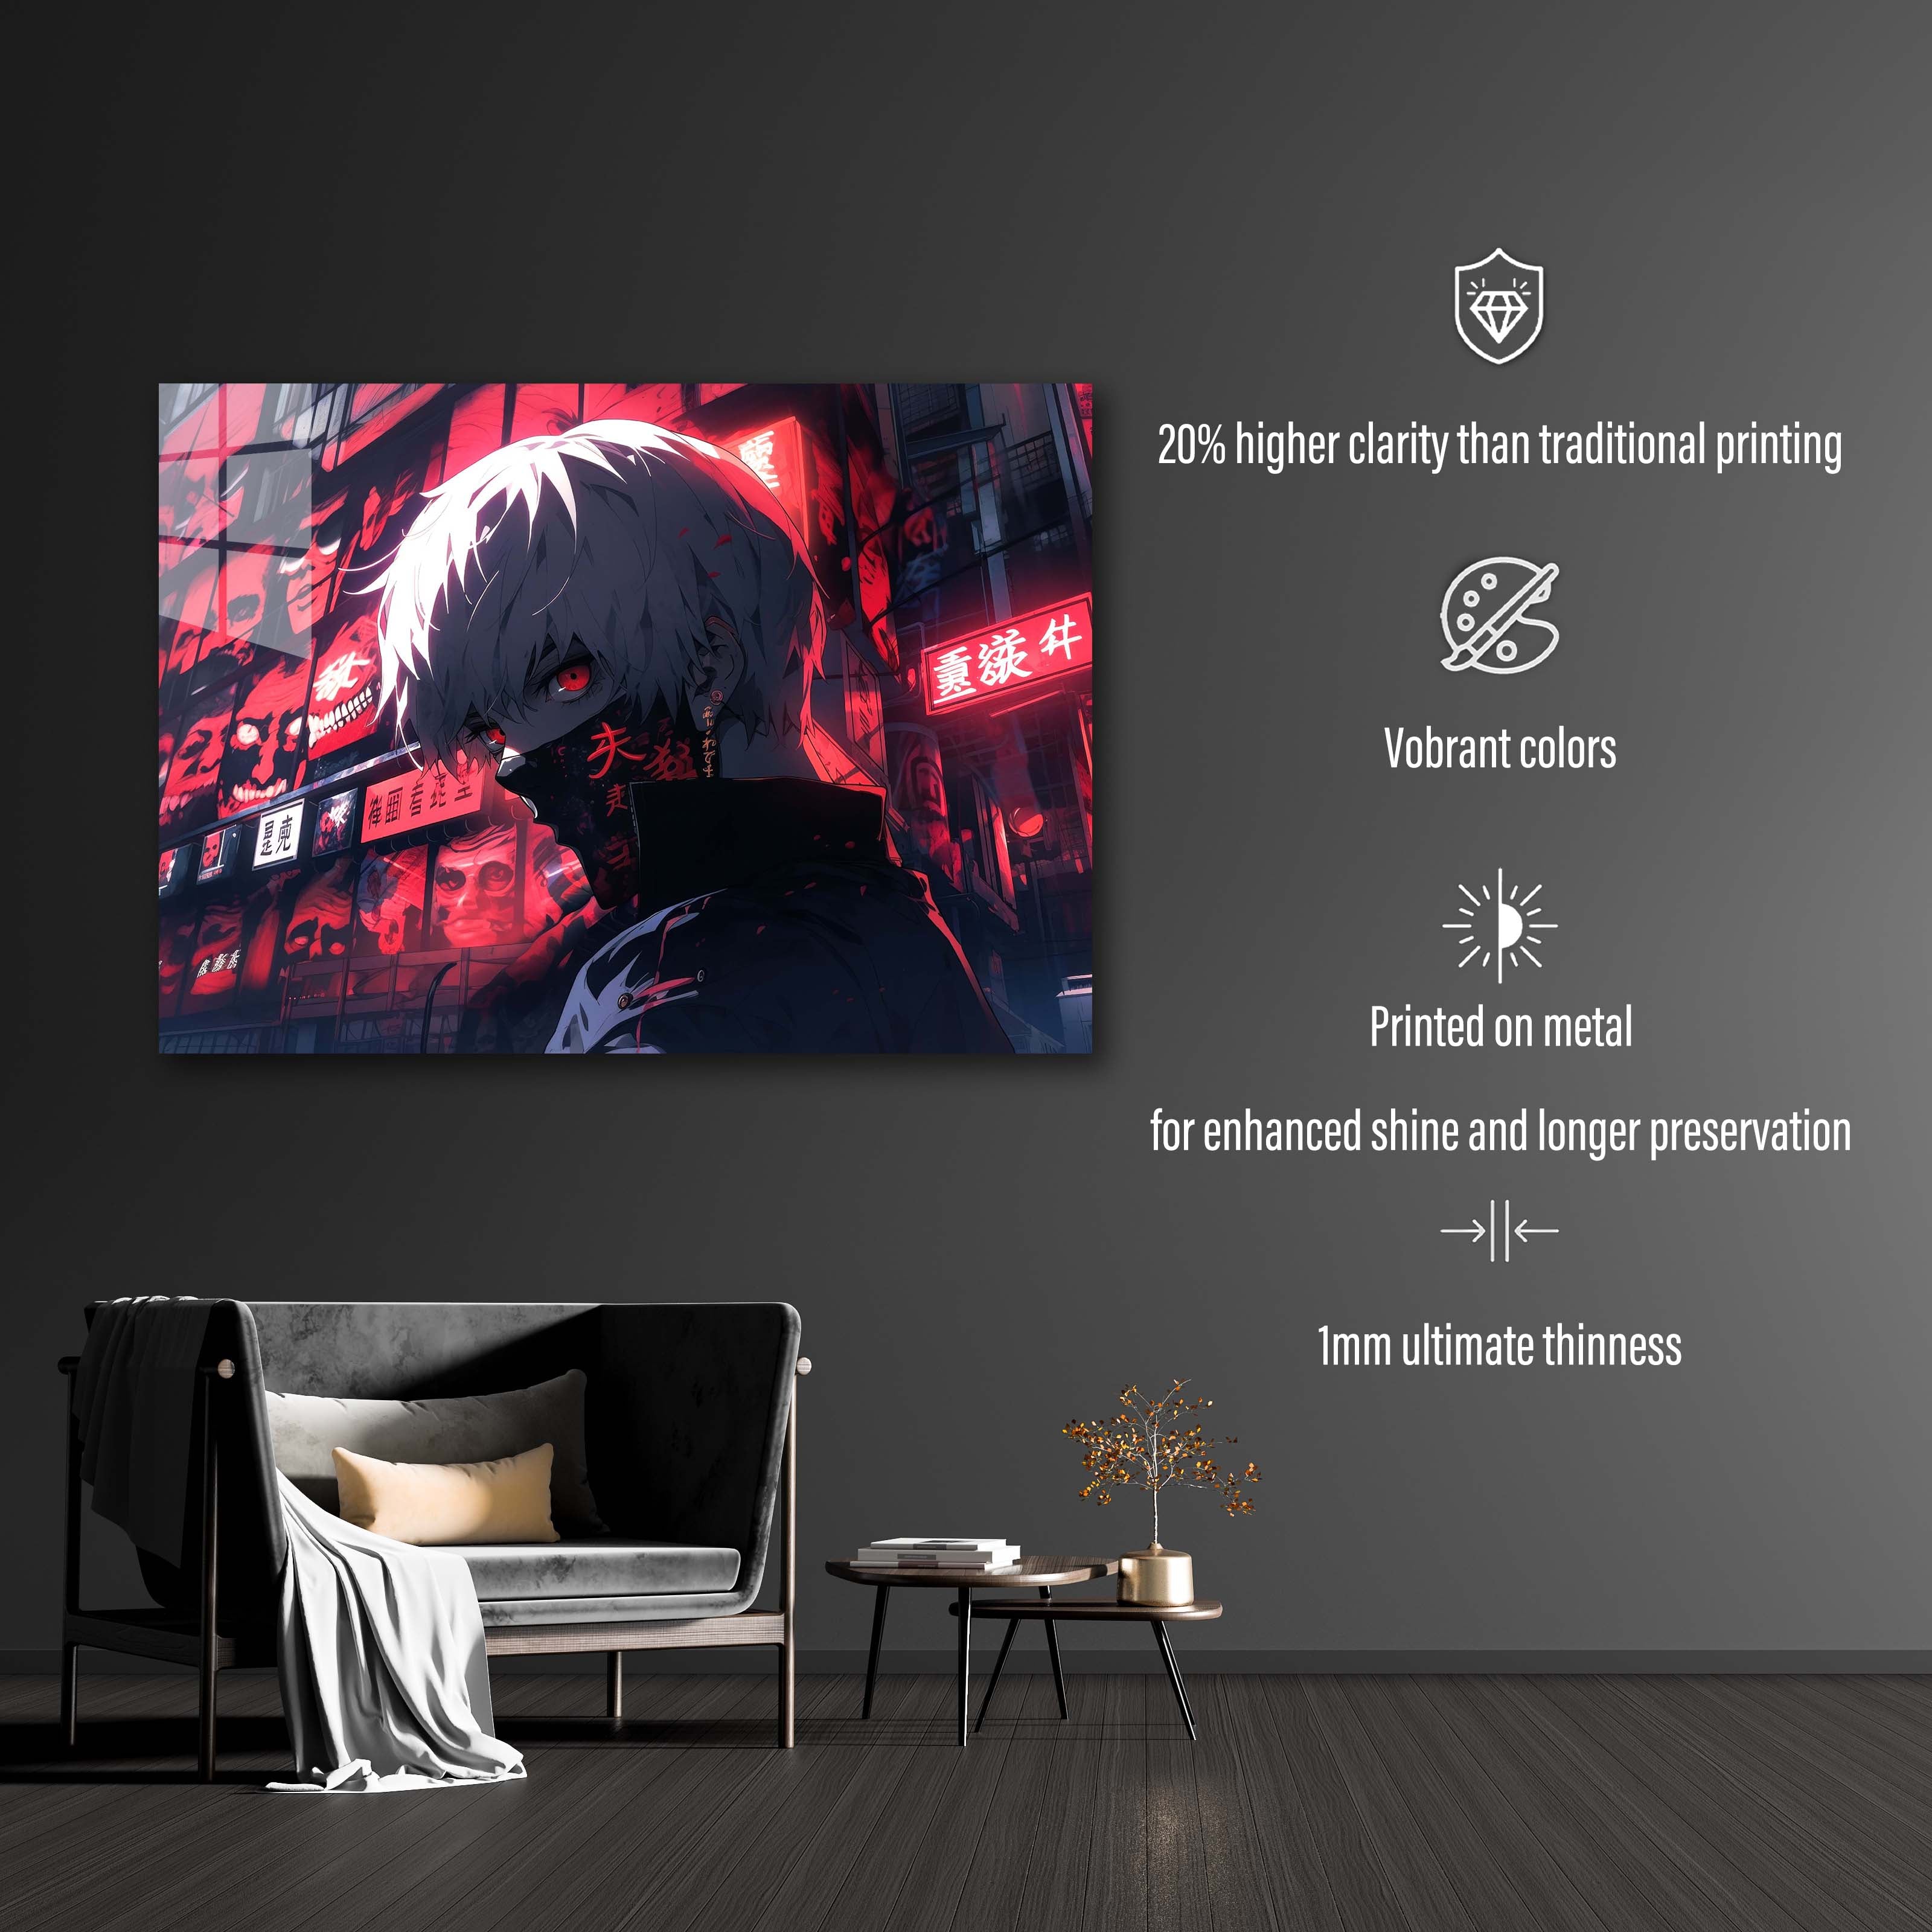 Tokyo Ghoul wallpaper by @visinaire.ai-designed by @visinaire.ai